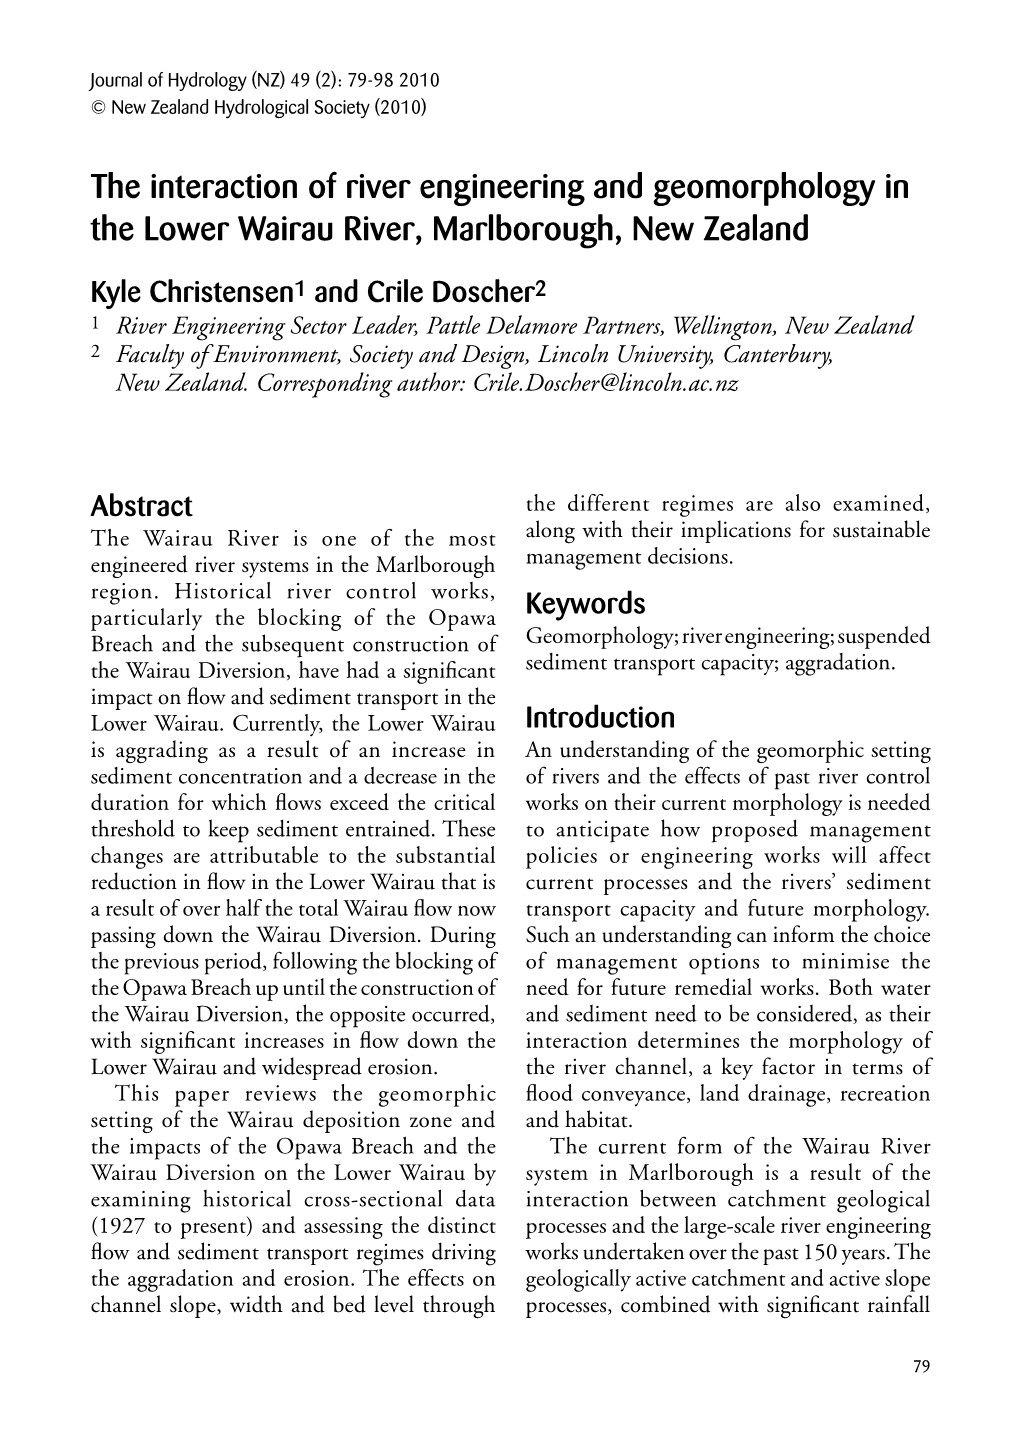 The Interaction of River Engineering and Geomorphology in the Lower Wairau River, Marlborough, New Zealand